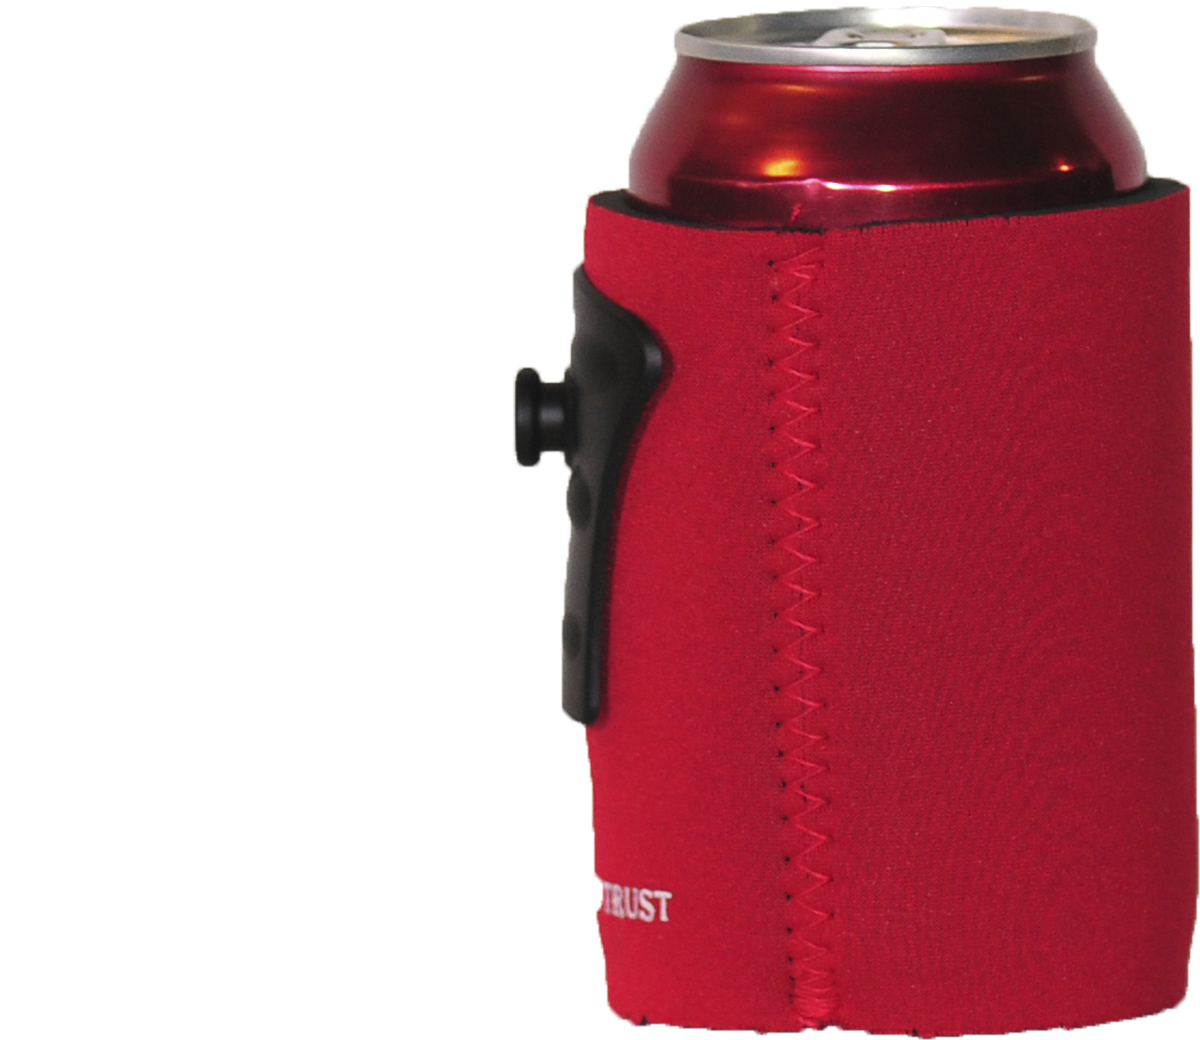 Small Hands Free Beer & Drink Holder/Carrier (RED)